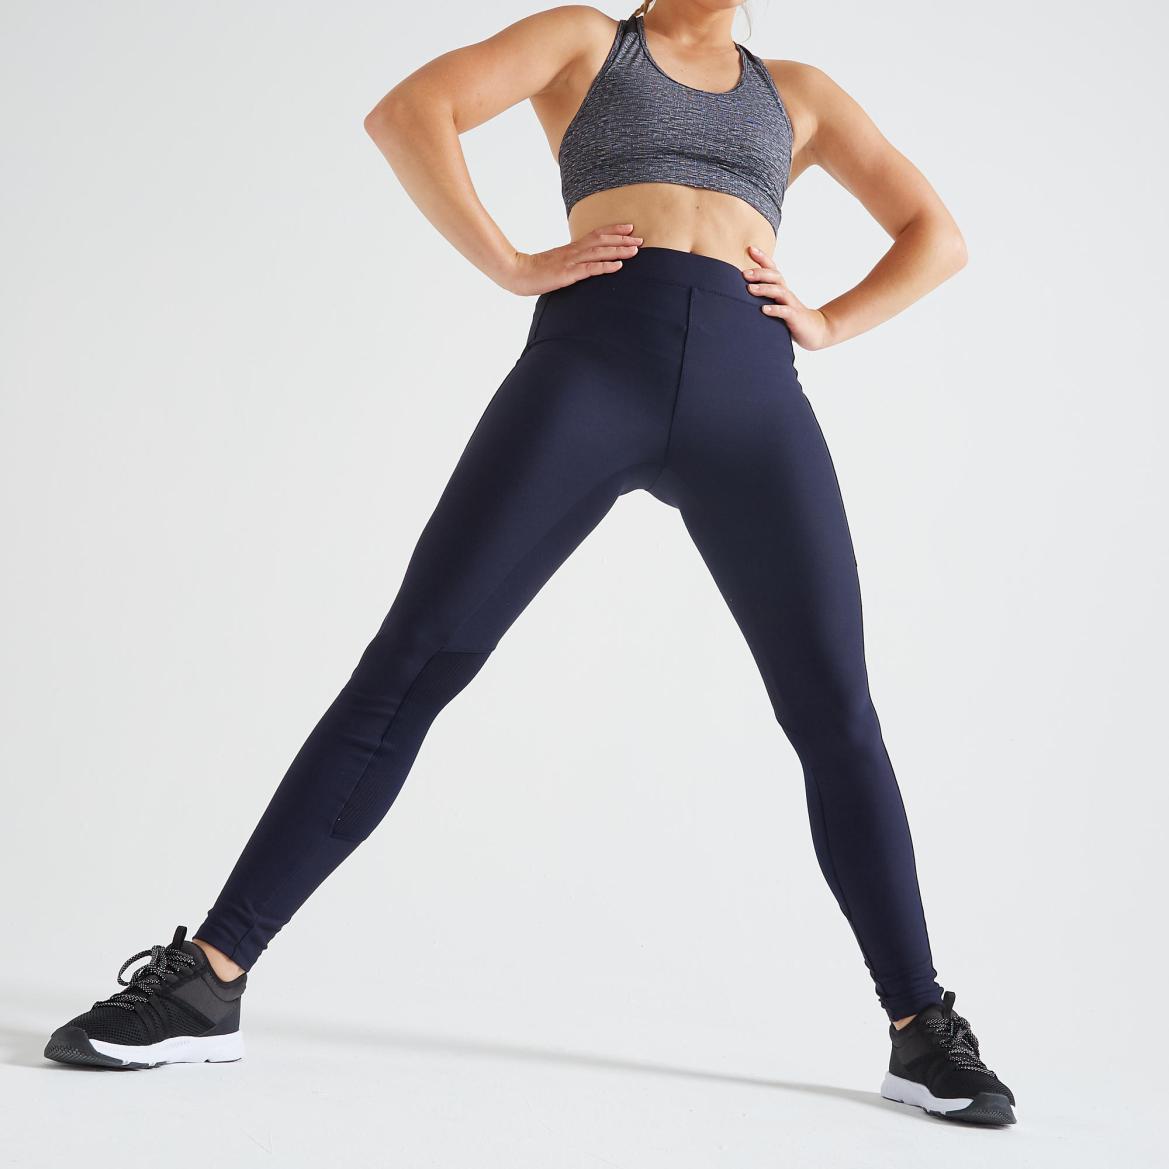 Leggings Managers Comprehensive Fitness A Fashion